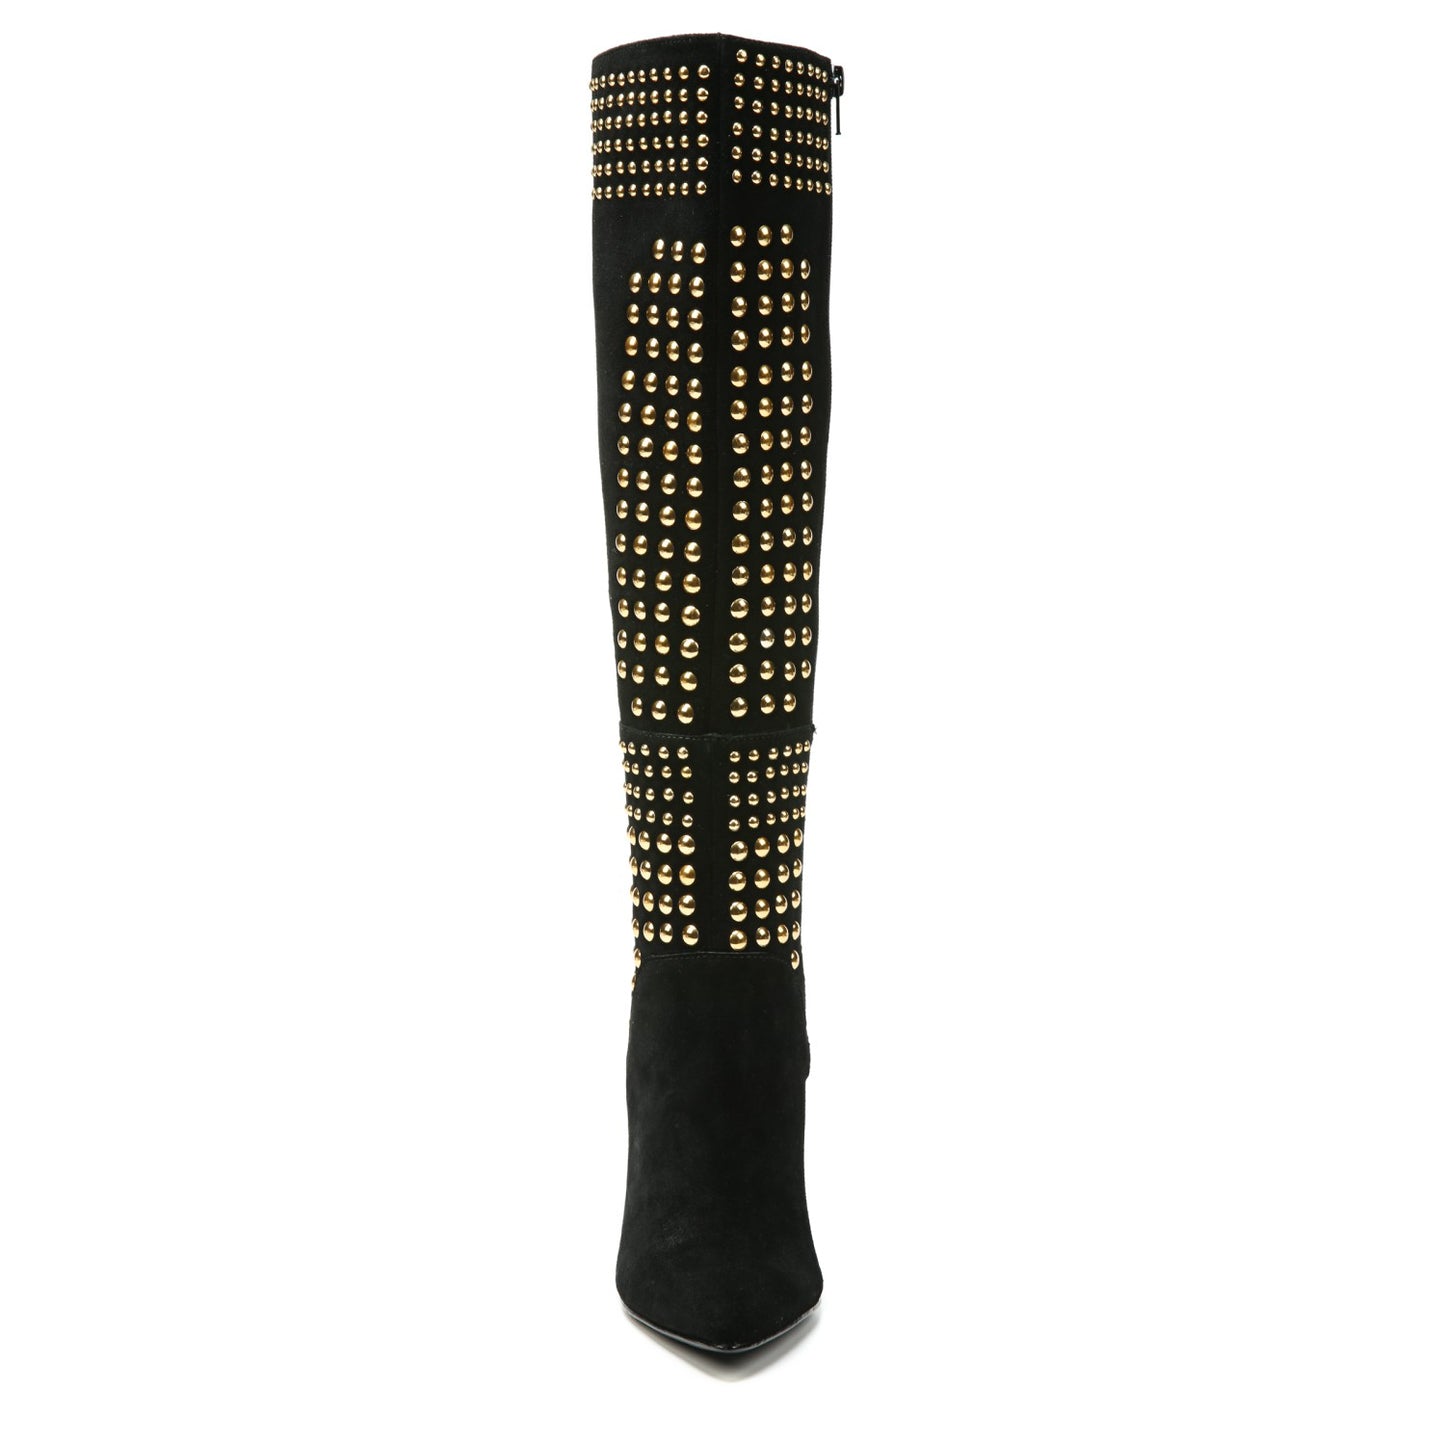 The Fergie Danica is sophistication all wrapped in this tall shaft suede leather boot with gold studded metal detailing and a pointed toe. Cow suede leather, 17.5" Shaft, Circumference 13", Synthetic traction outsole, Smooth lining, 4" Suede covered heel, Cushion insole for all day long comfort